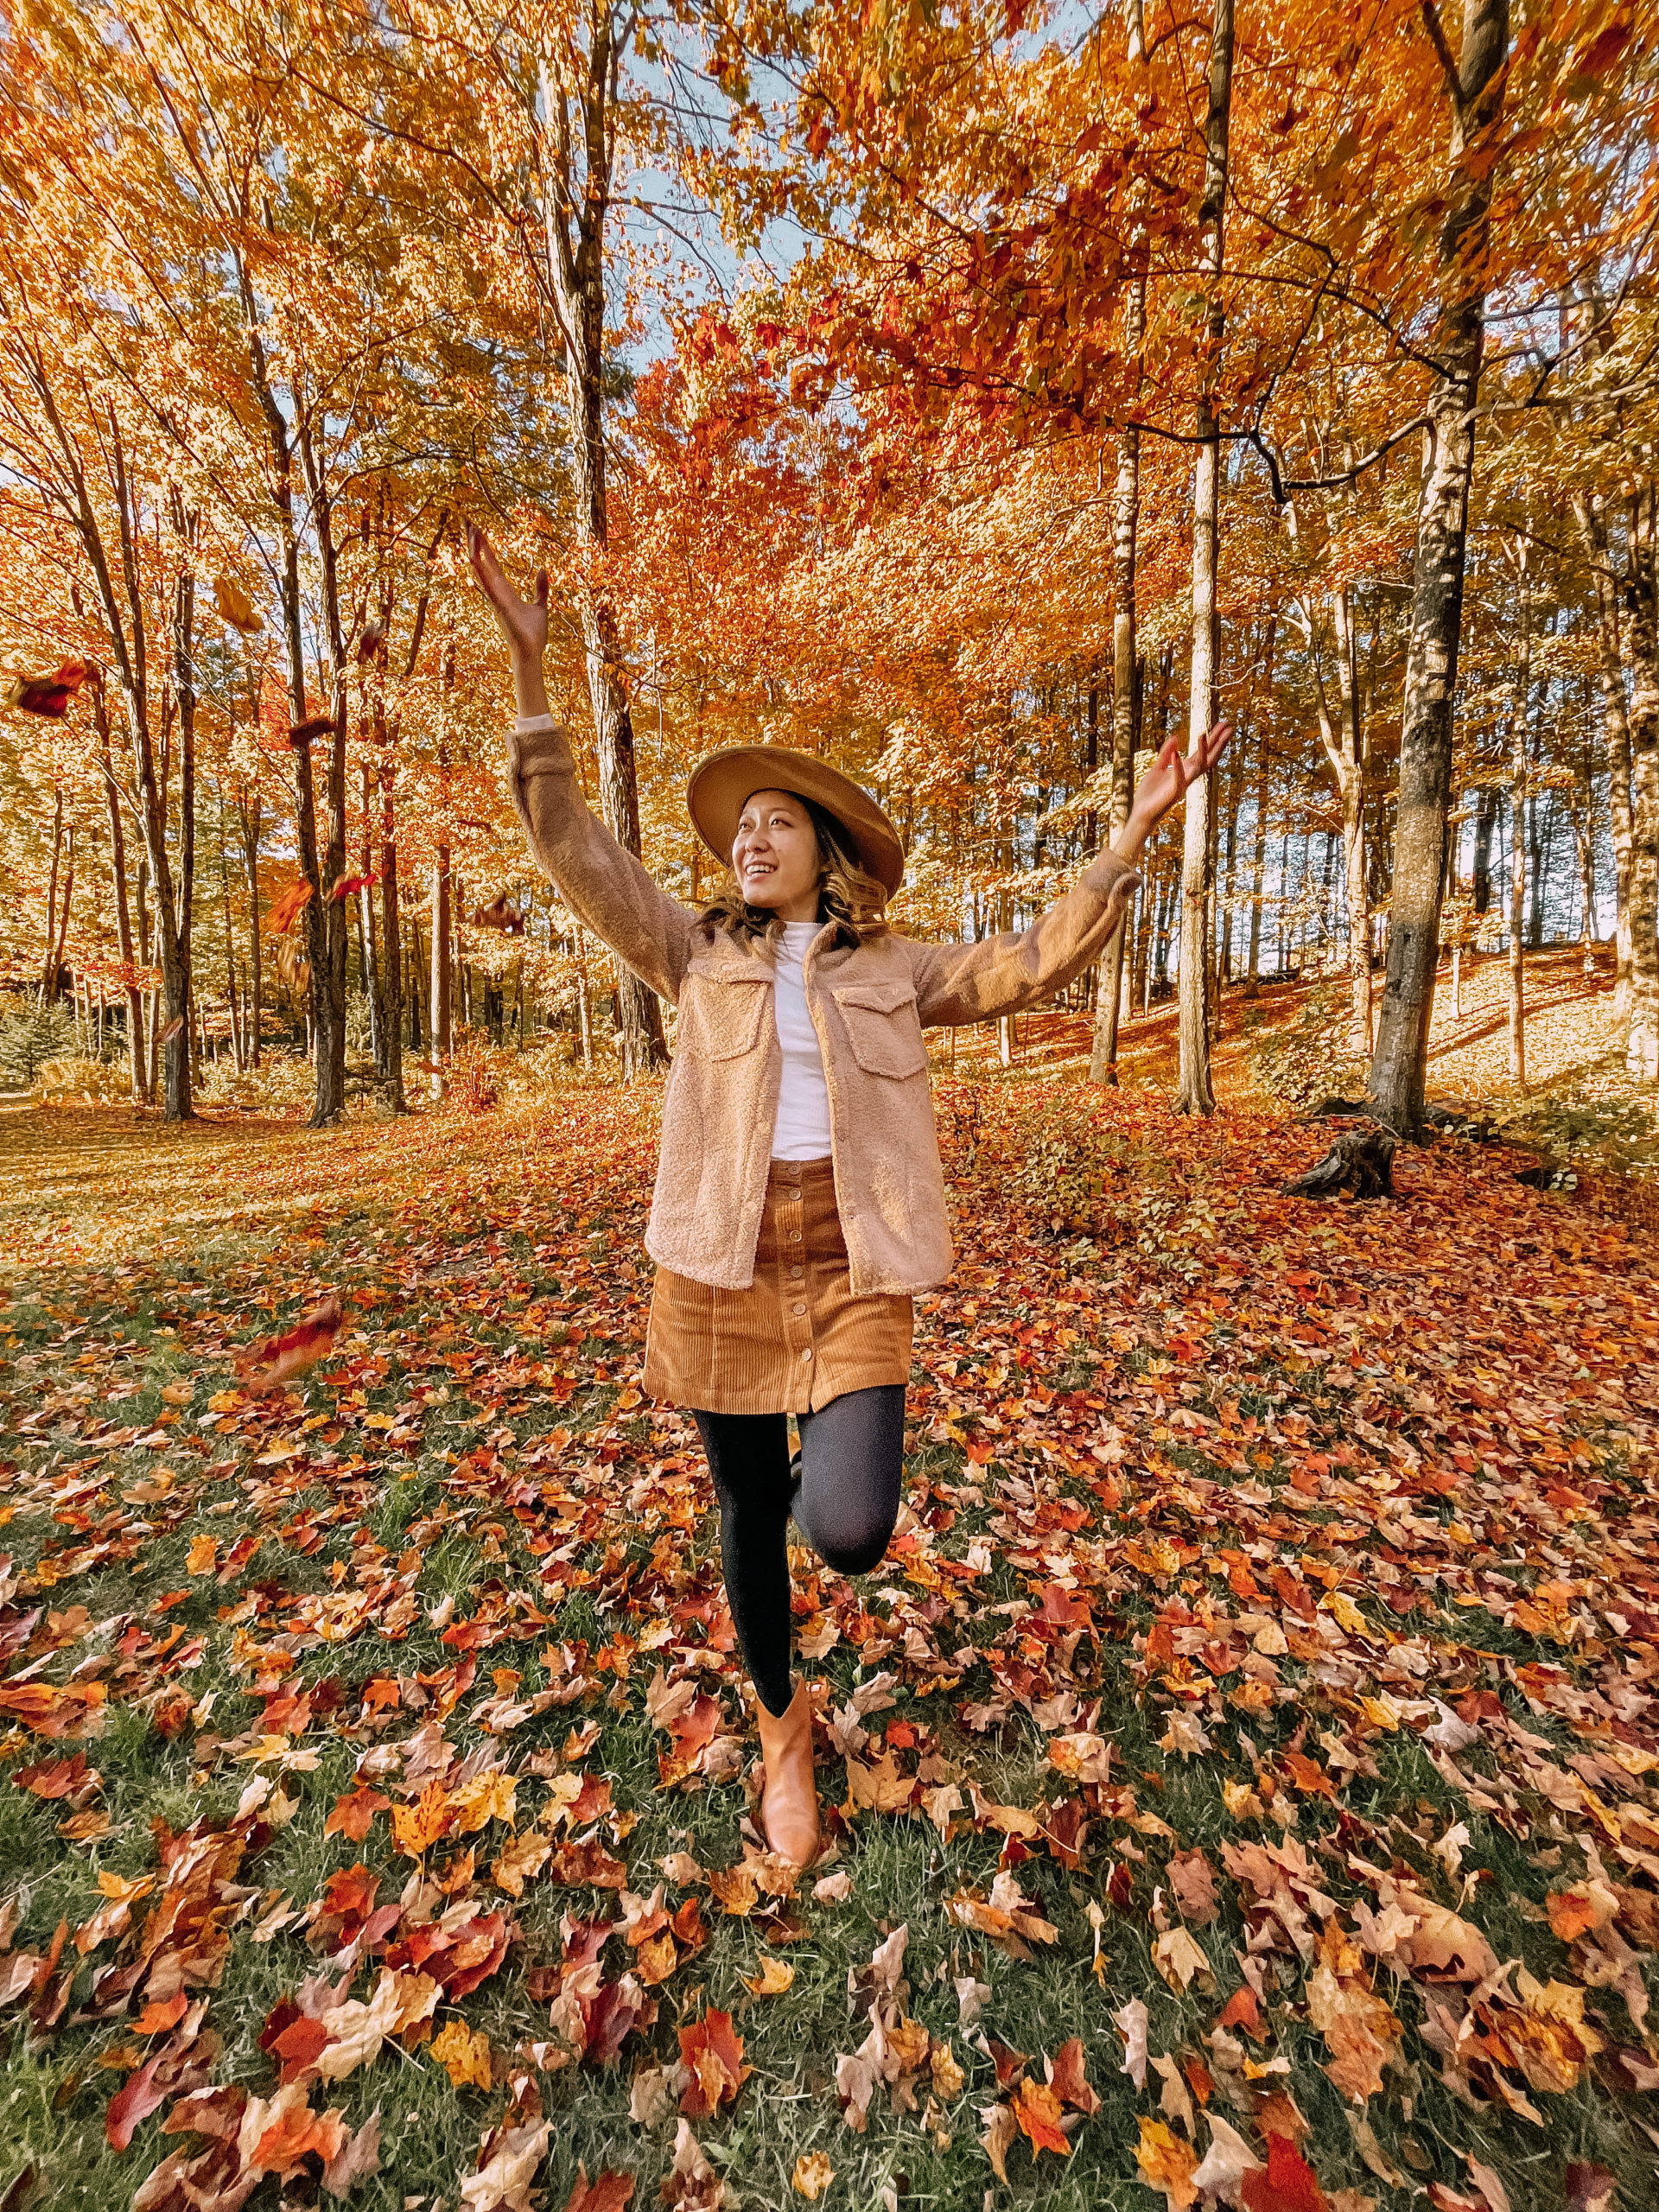 Woodstock, Vermont fall foliage leaf-peeping trip outfit - Abercrombie shearling shacket, corduroy skirt